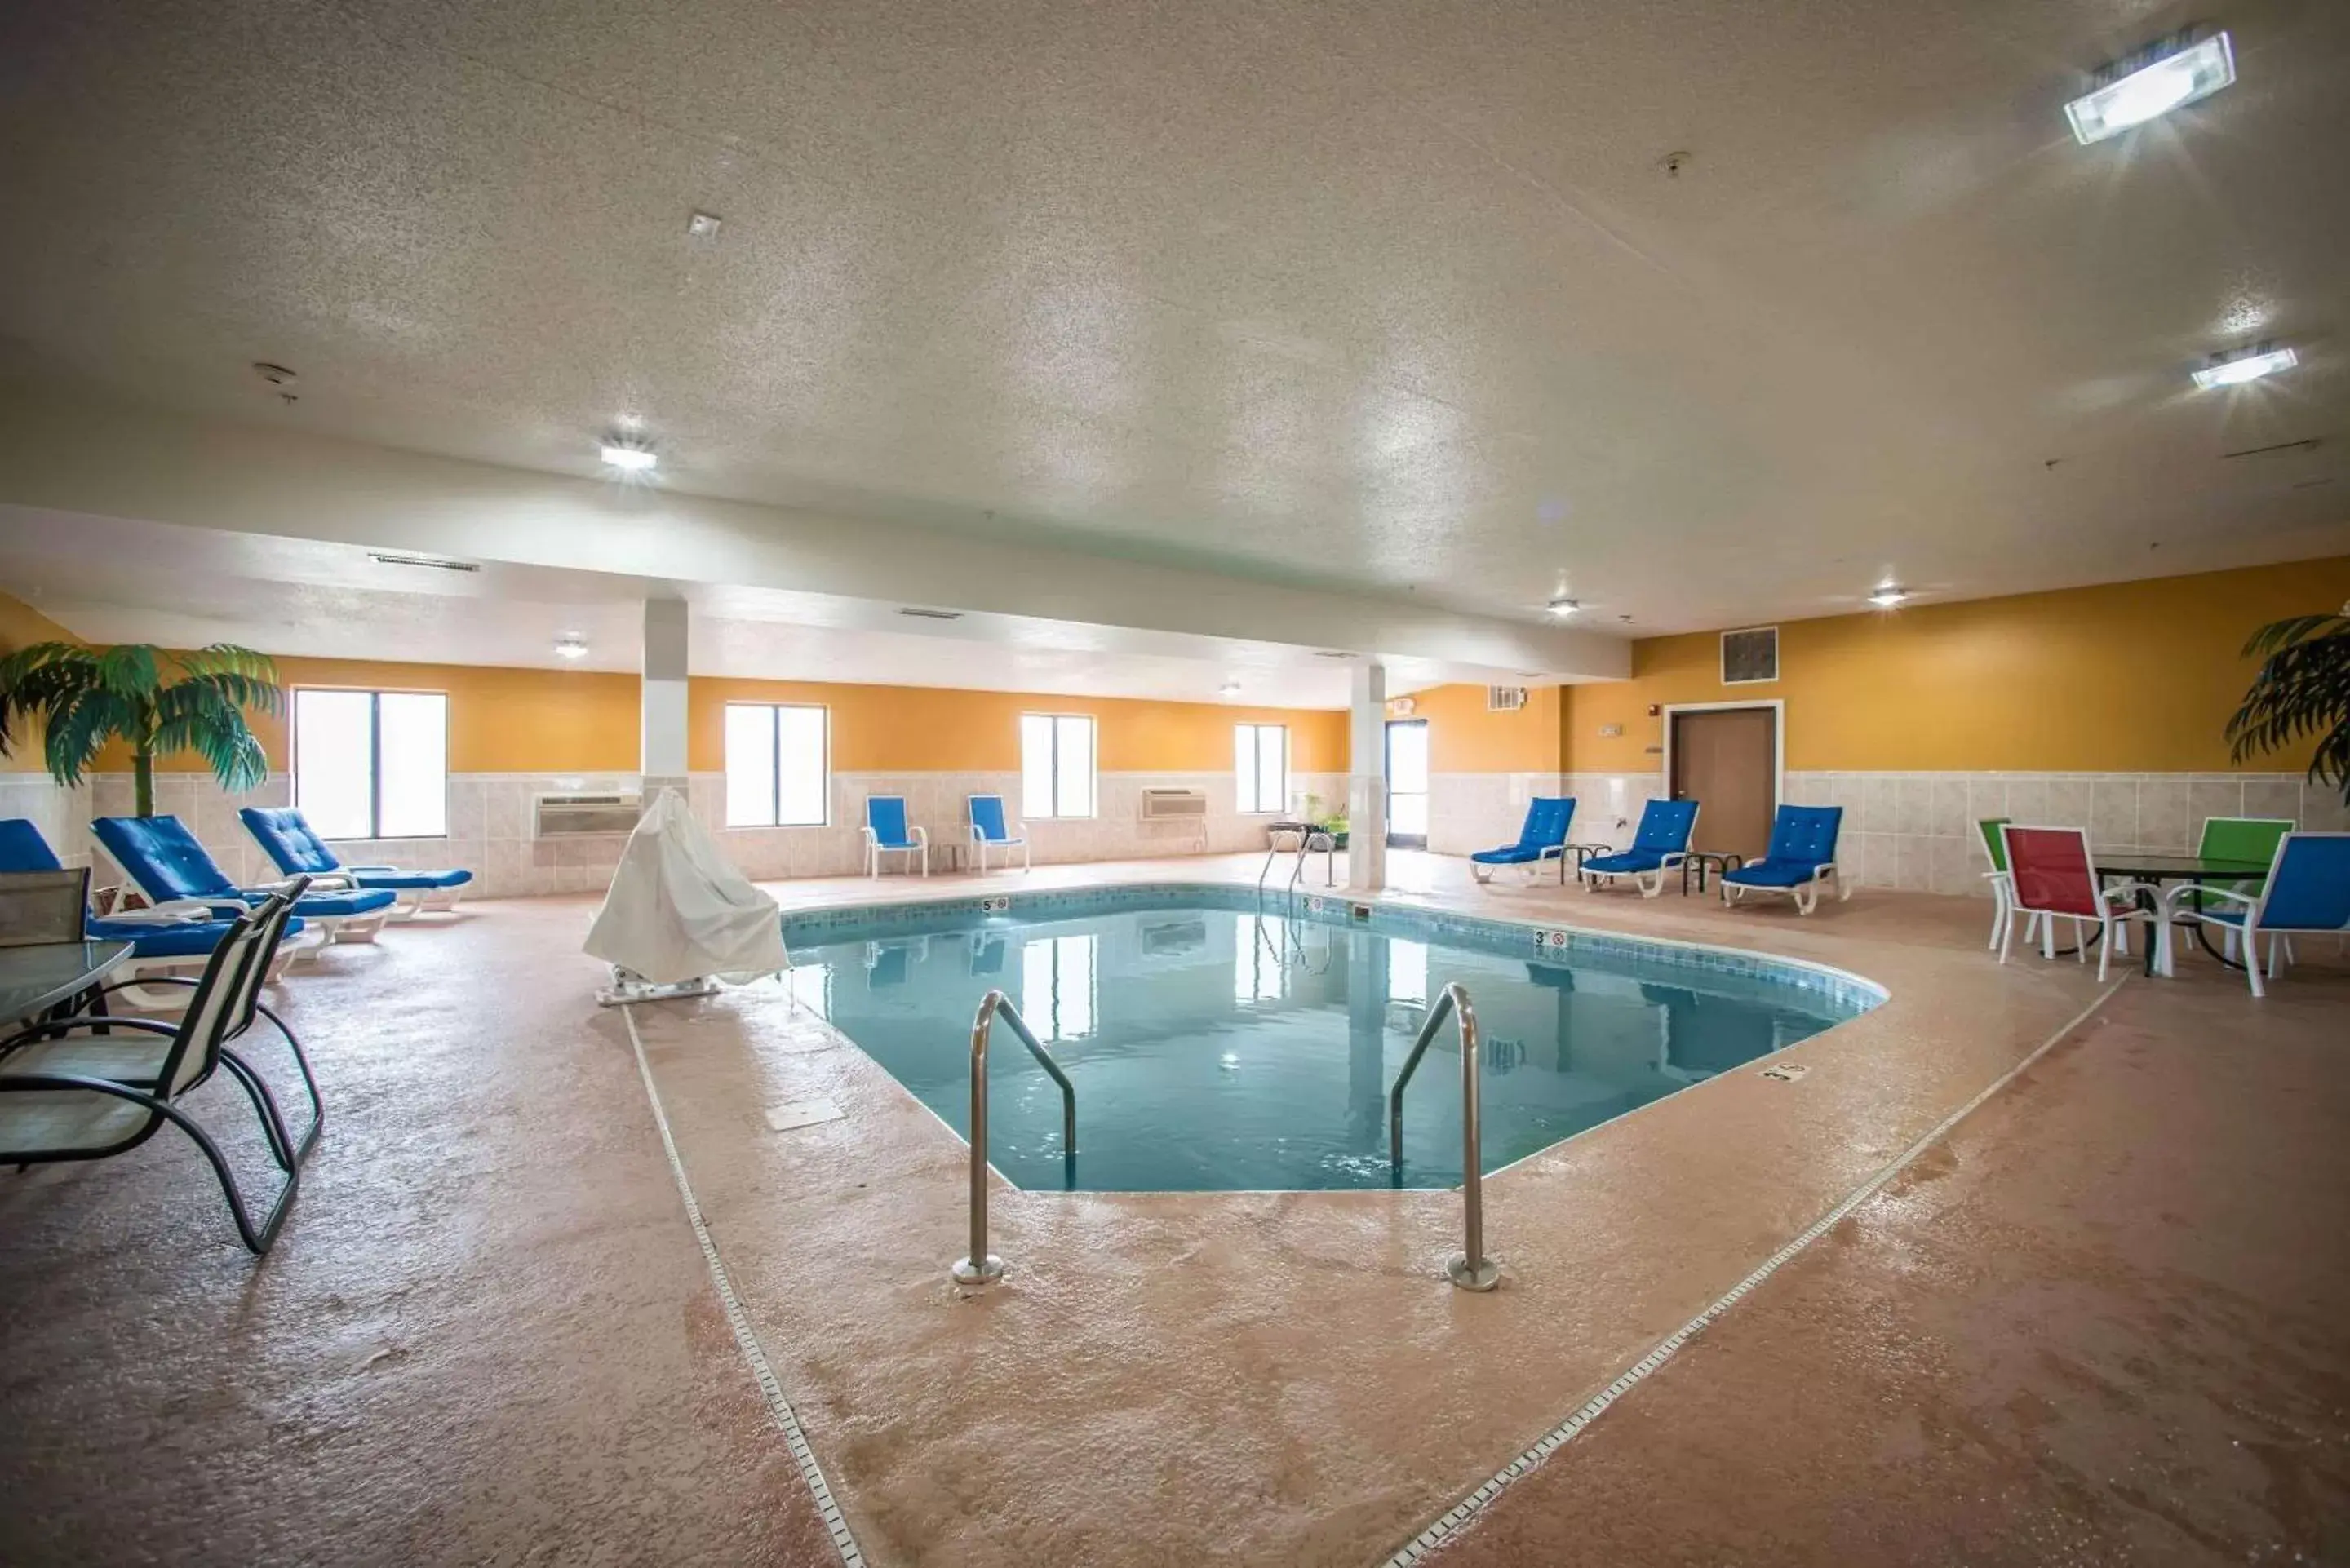 On site, Swimming Pool in Quality Inn Litchfield Route 66